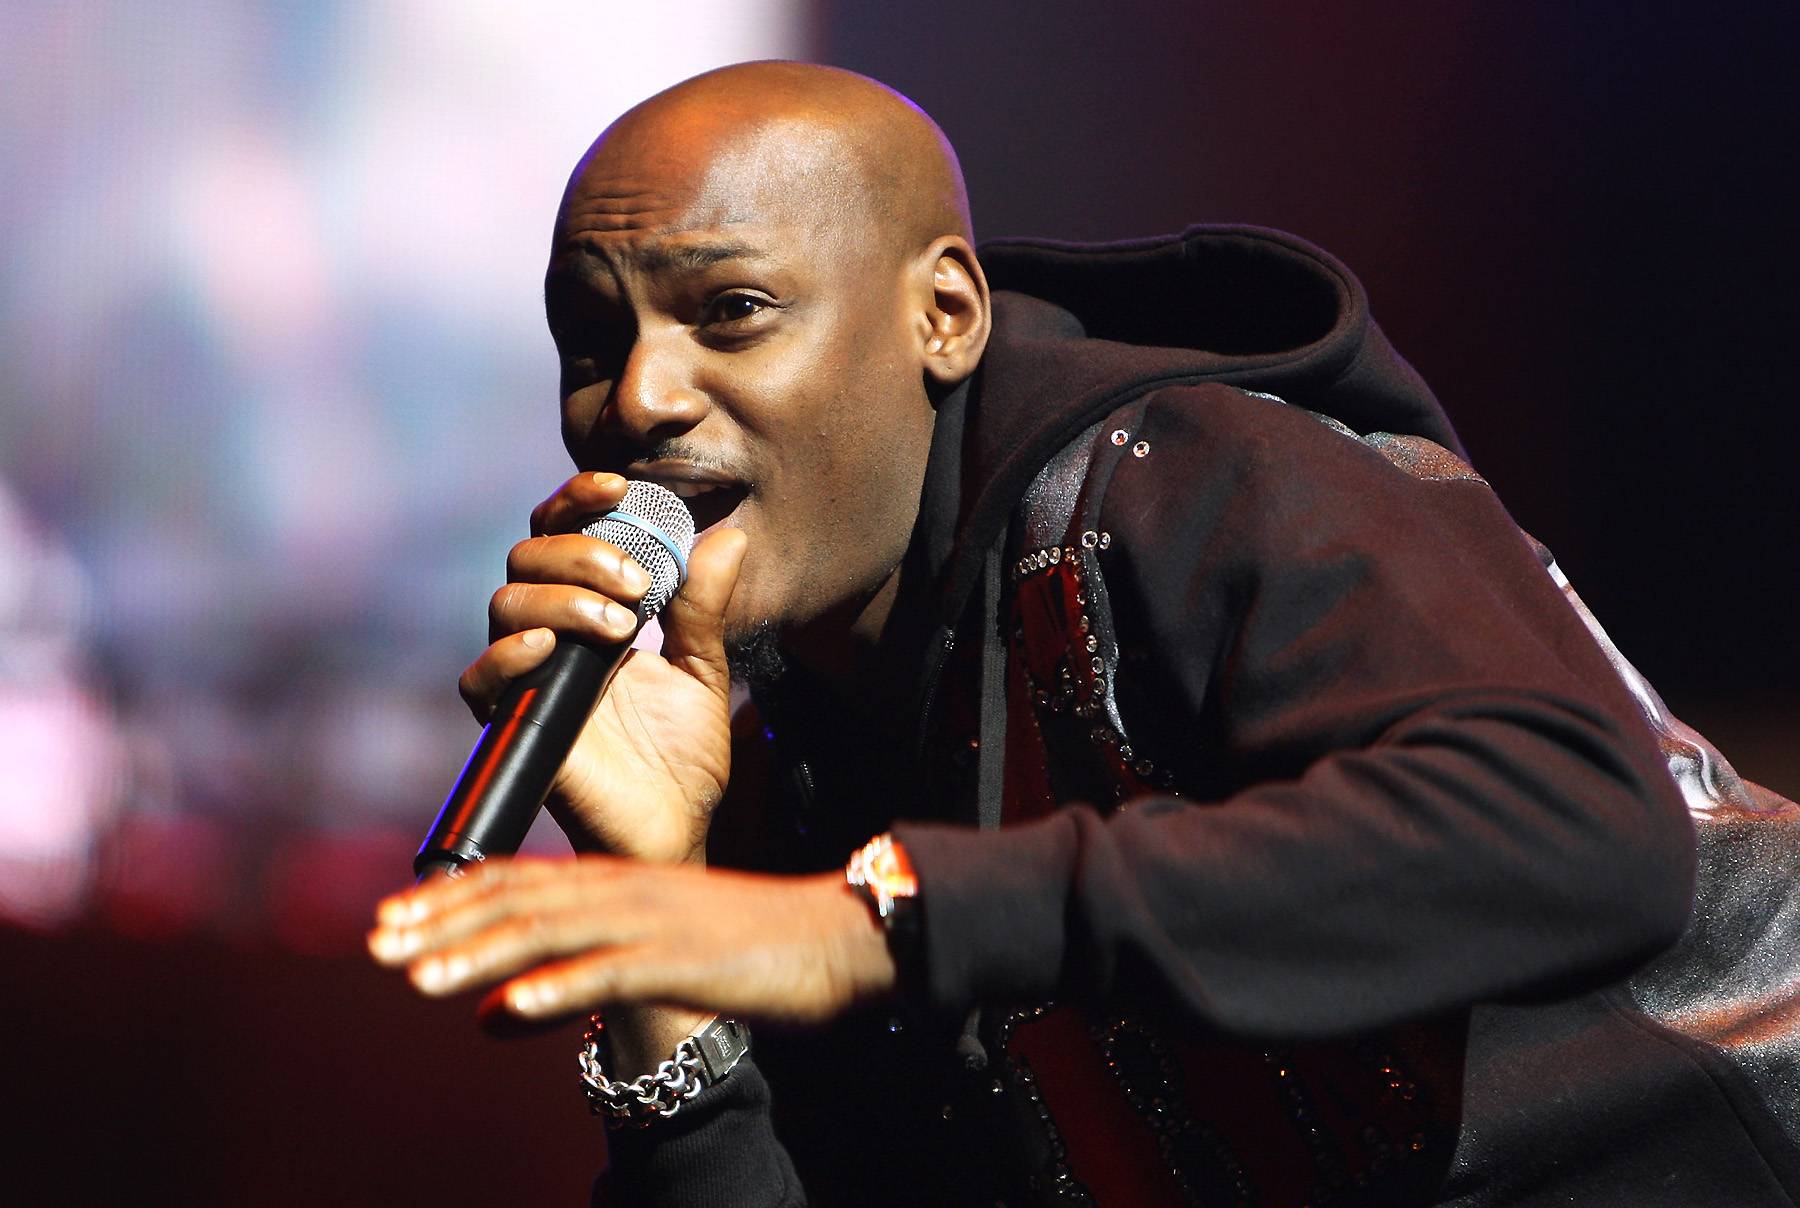 2 Face Idibia: Road to BET Awards 2013 - Regarded as one of the premier faces of African hip hop, 2Face Idibia has continued to make a splash throughout the world with his unique sound and style. His success has grown exponentially since last year as he experiments with new sounds and artists.(Photo: Dan Kitwood/Getty Images)